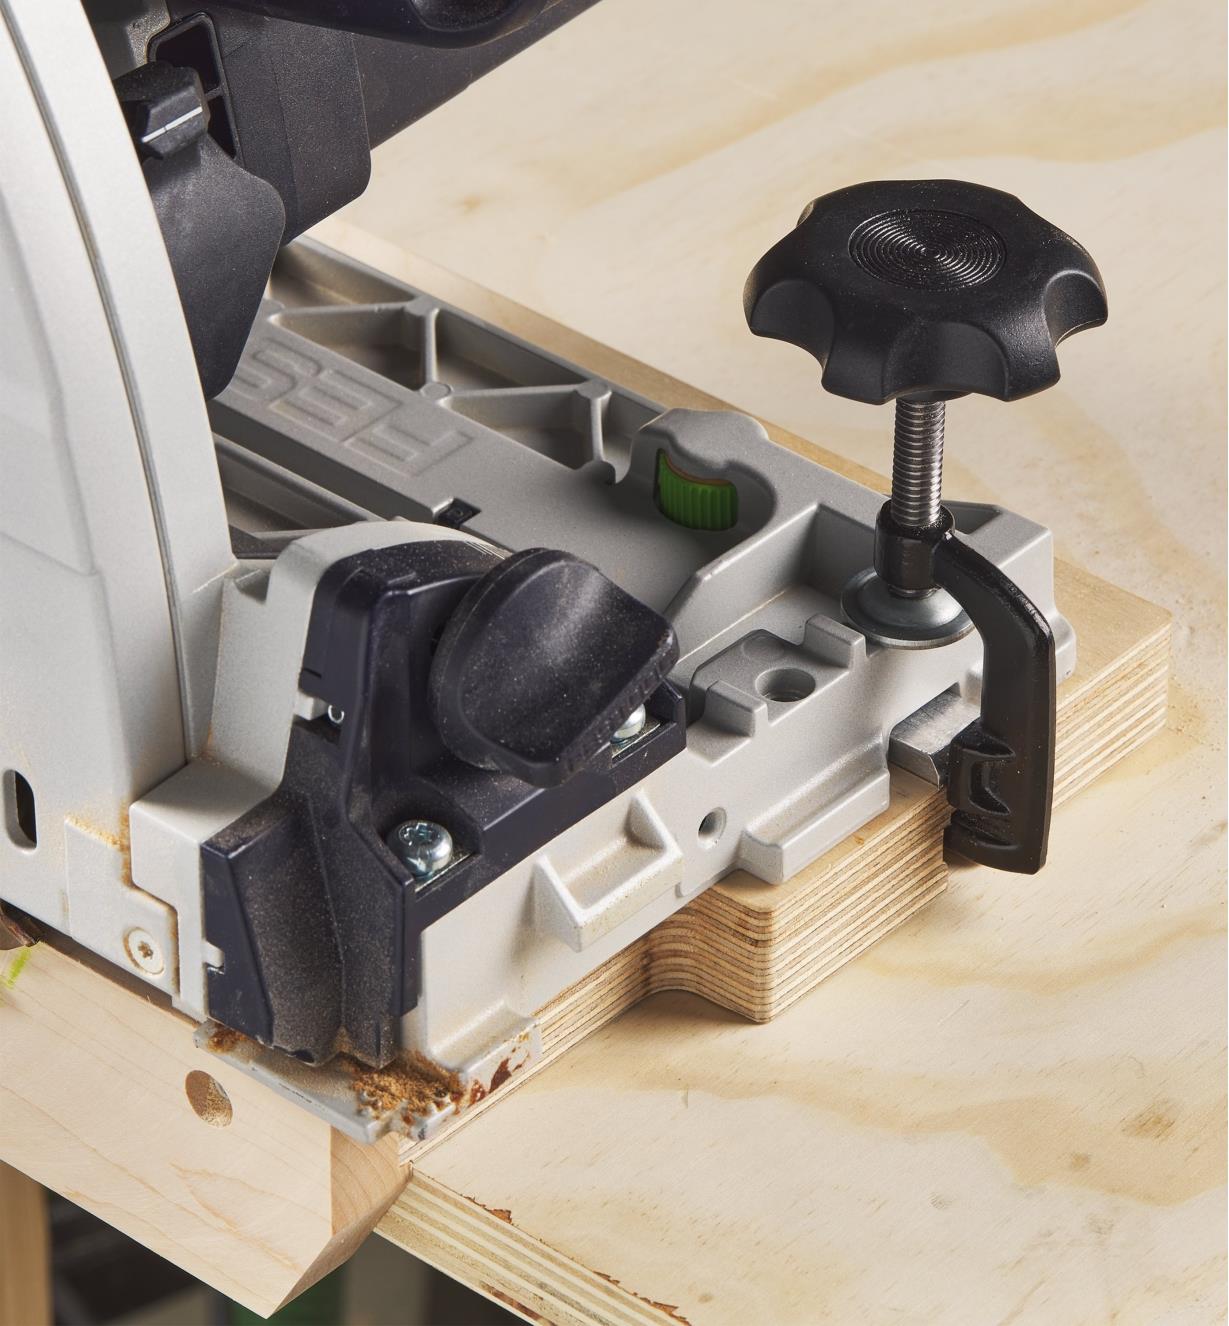 A track-saw guide clamp holds a track saw to a trimmed track saw alignment jig as its blade is reset